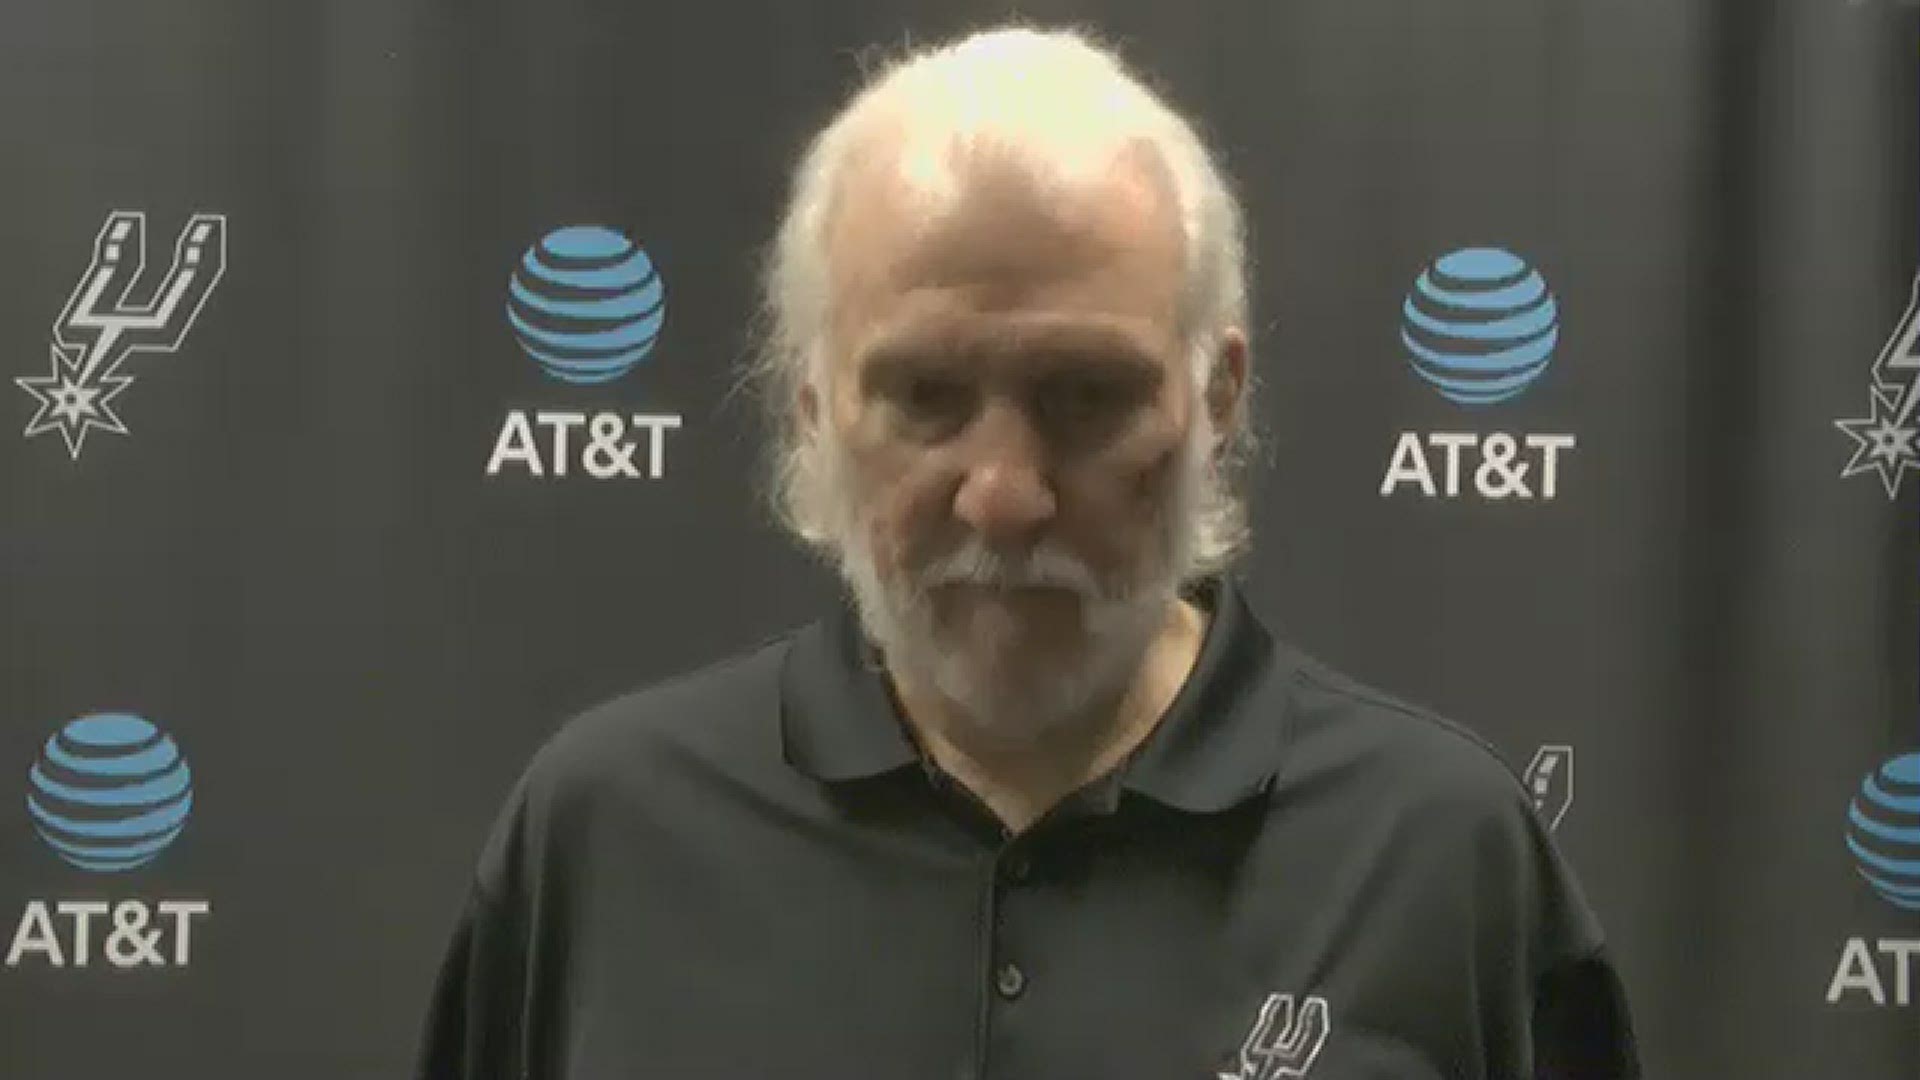 Pop talked about the team defense, Dejounte Murray's stellar game, and competing for a win against a solid opponent.